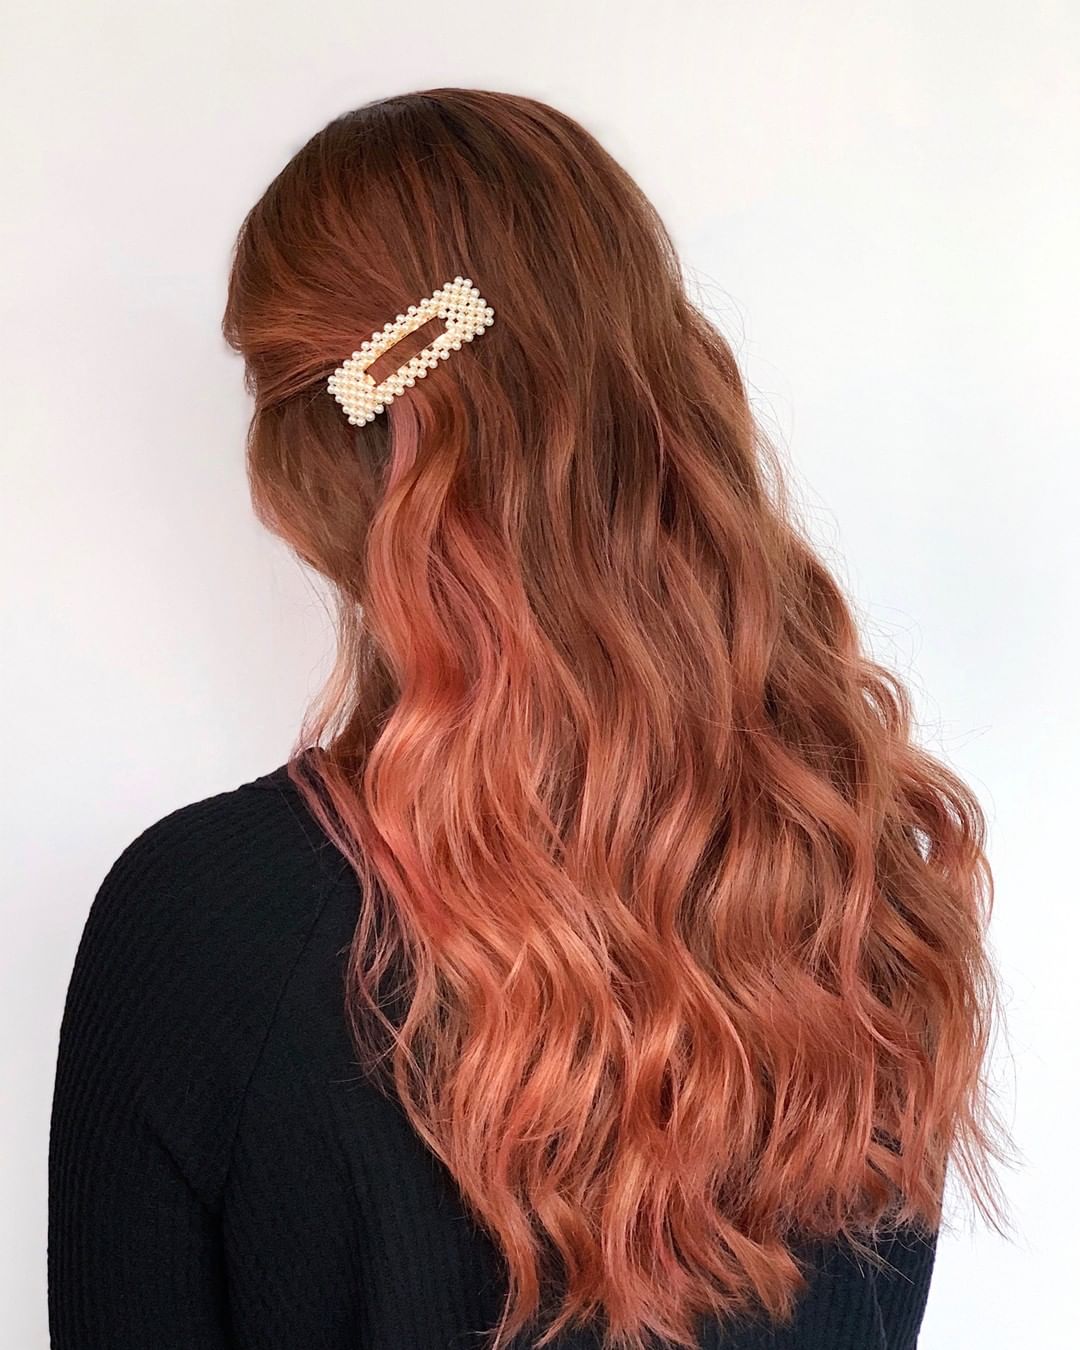 11 Amazing Fall Hair Color Trends That Will Be Huge in 2021